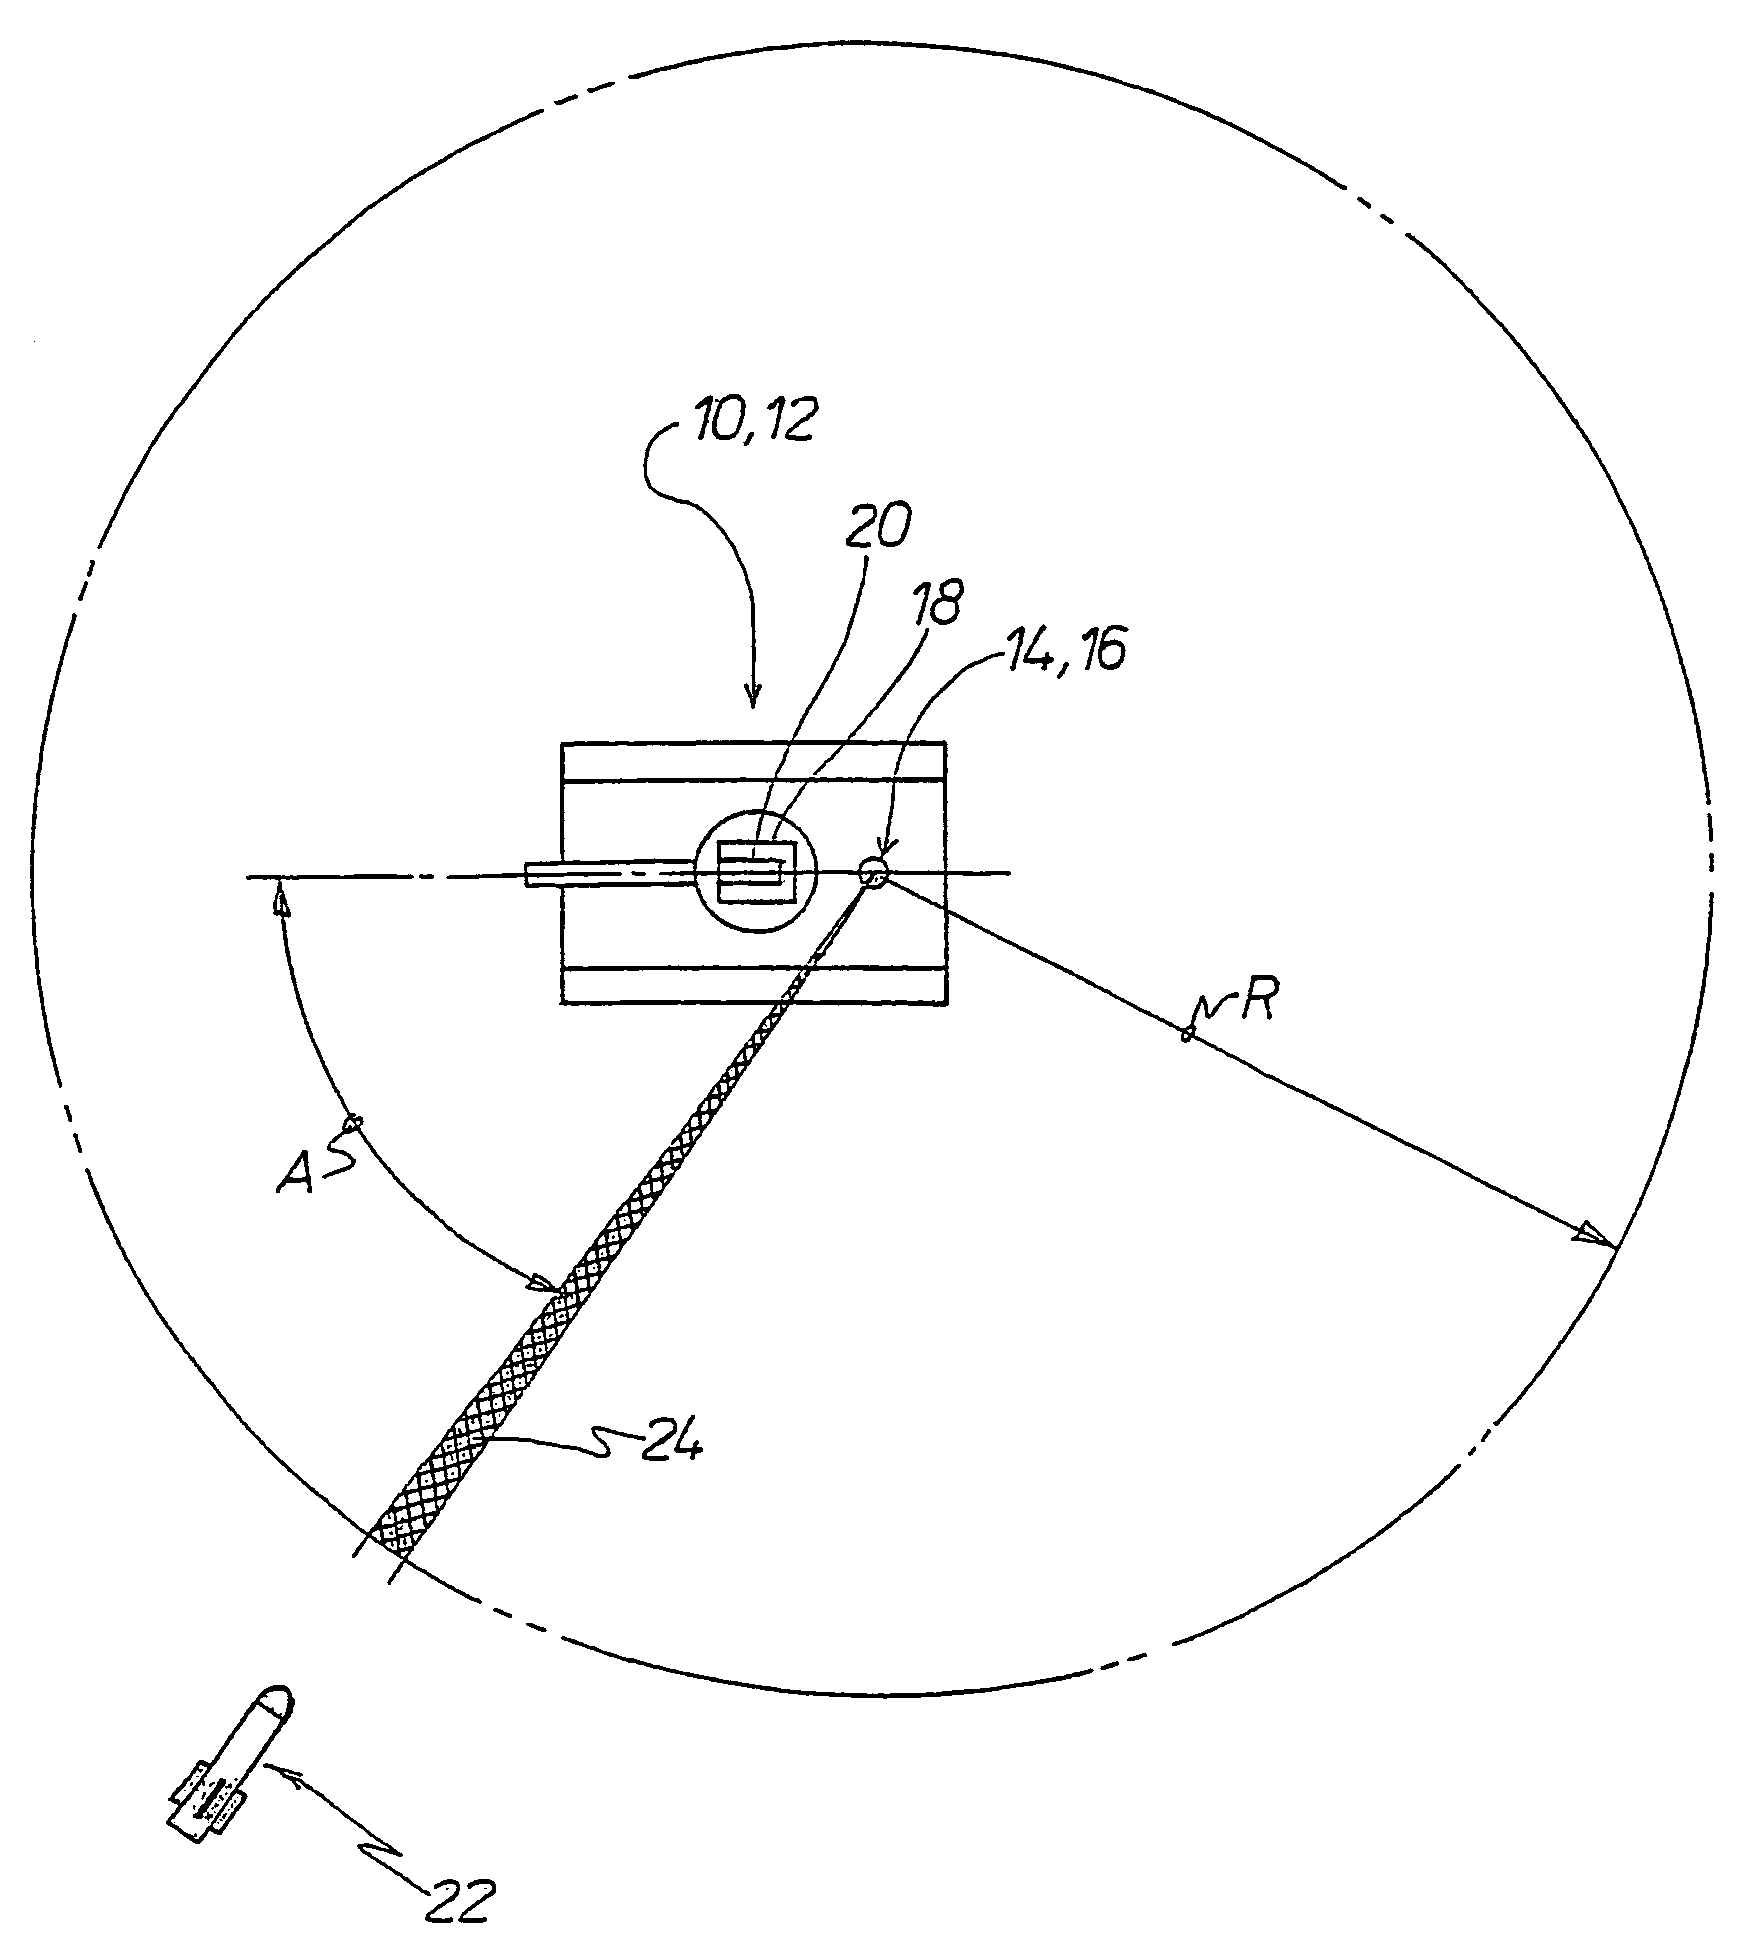 Self-protecting device for an object